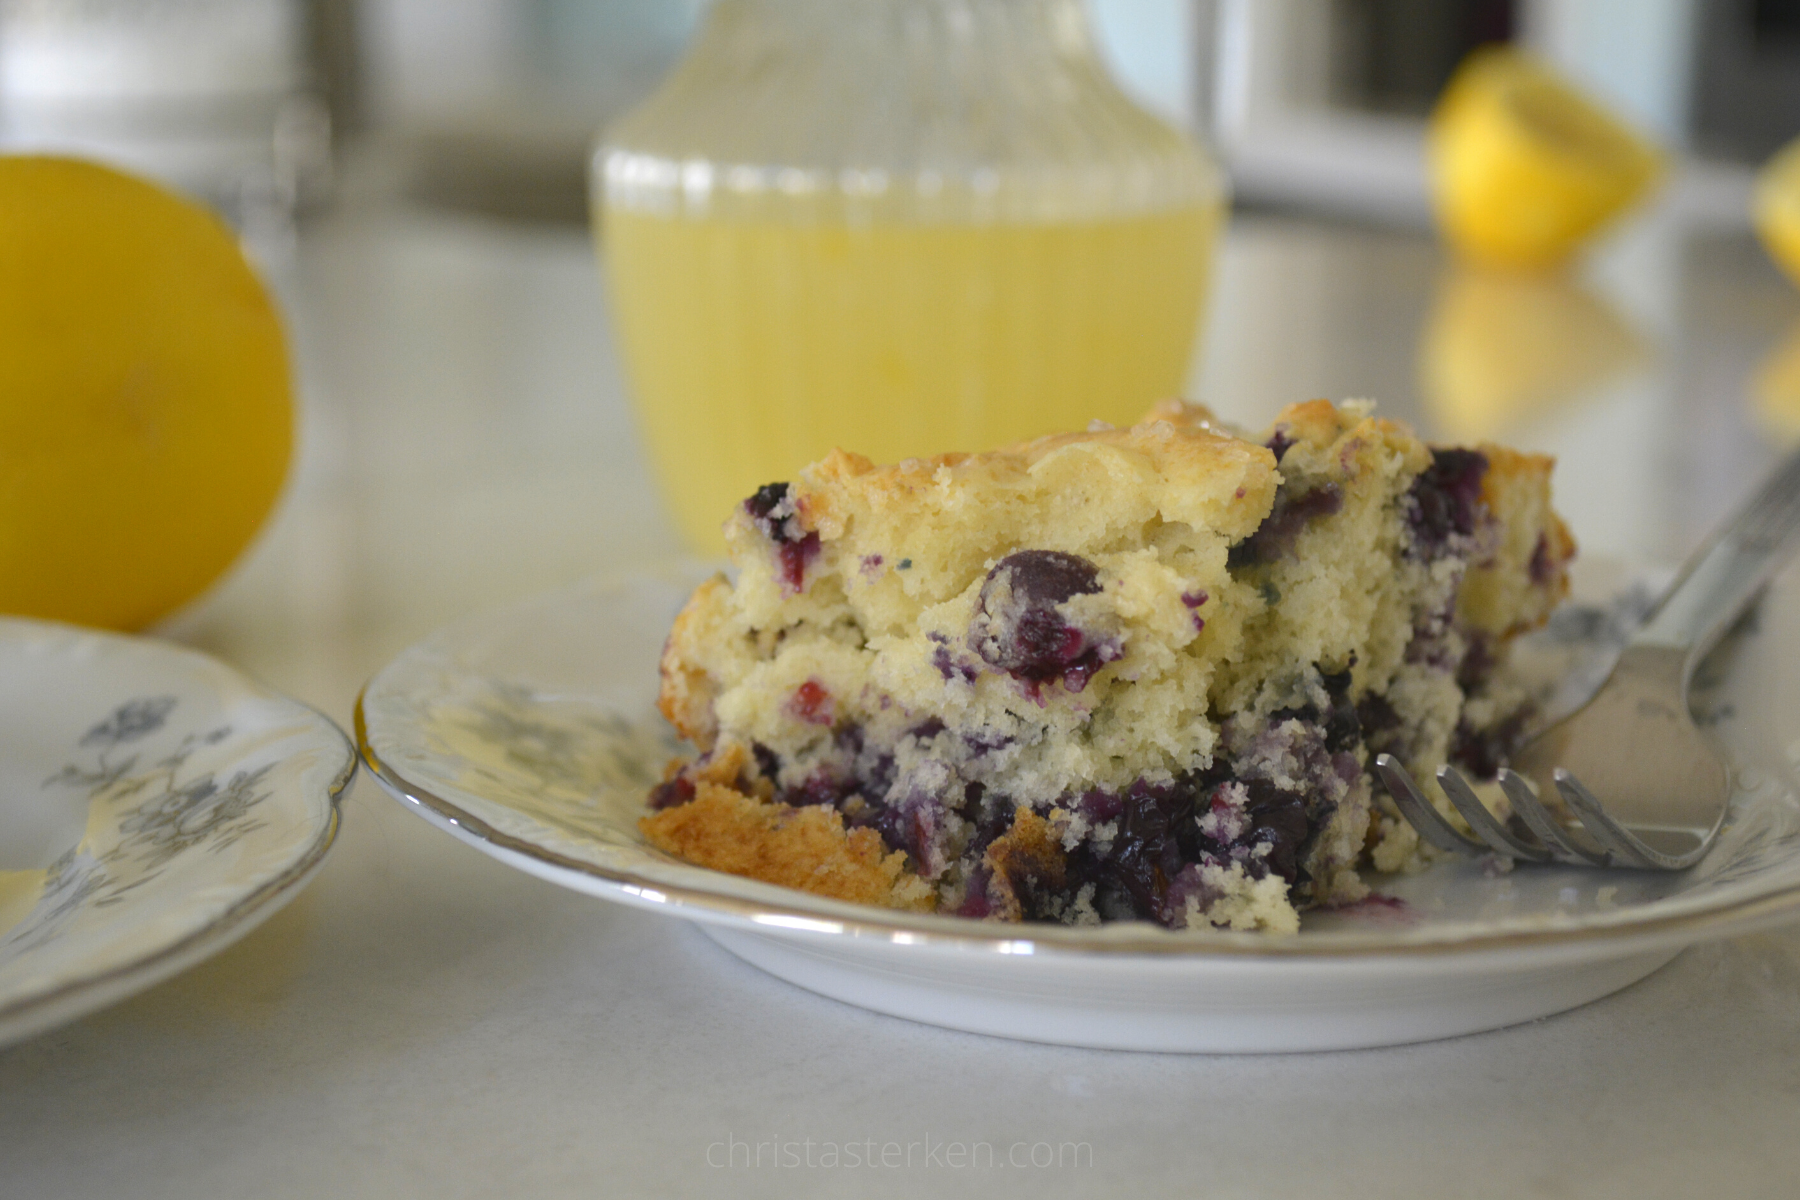 blueberry pudding with lemon sauce on saucer